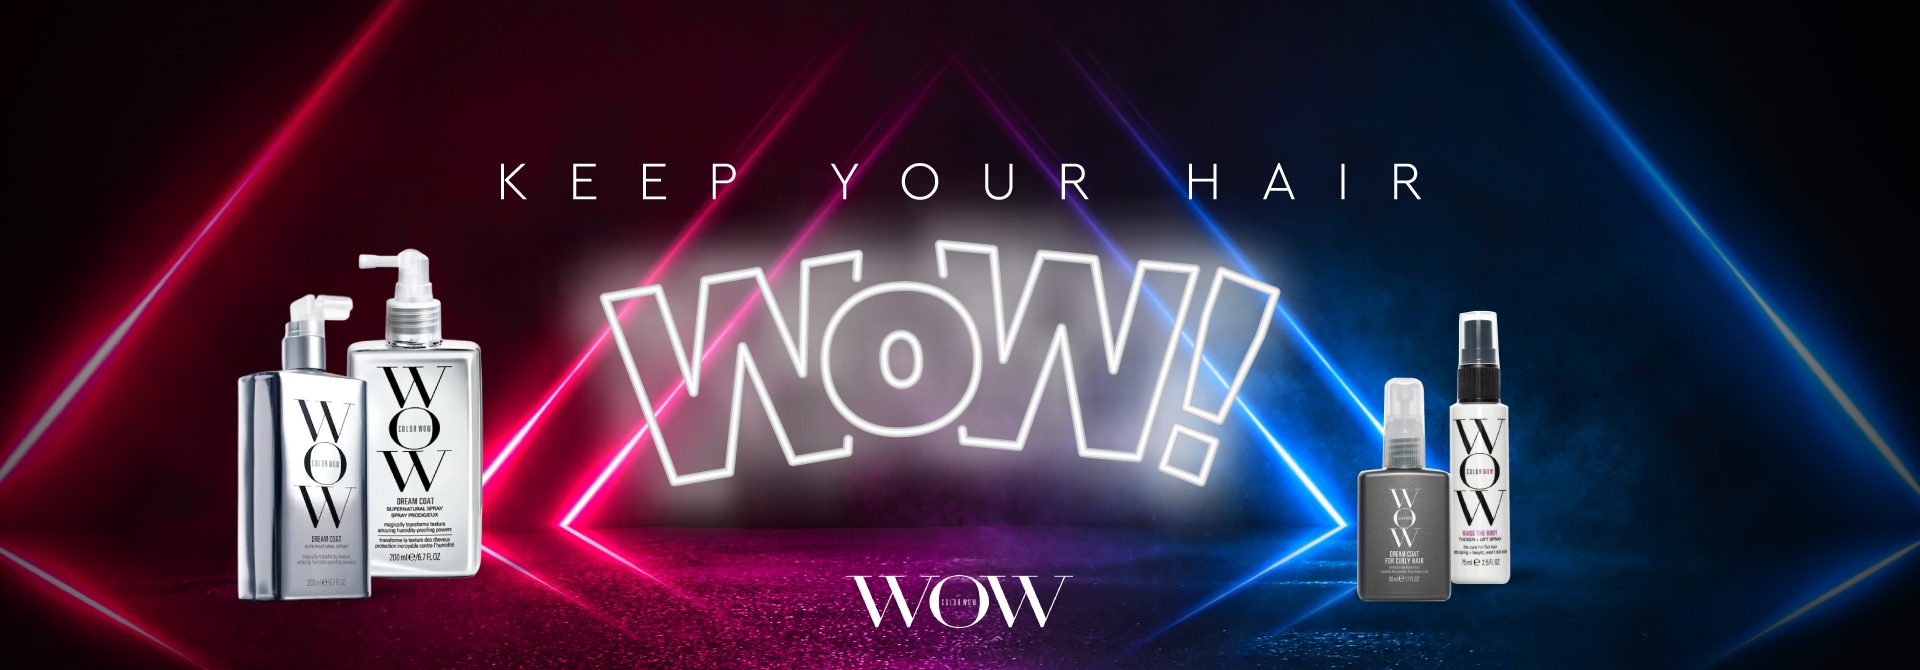 color wow banner brand page